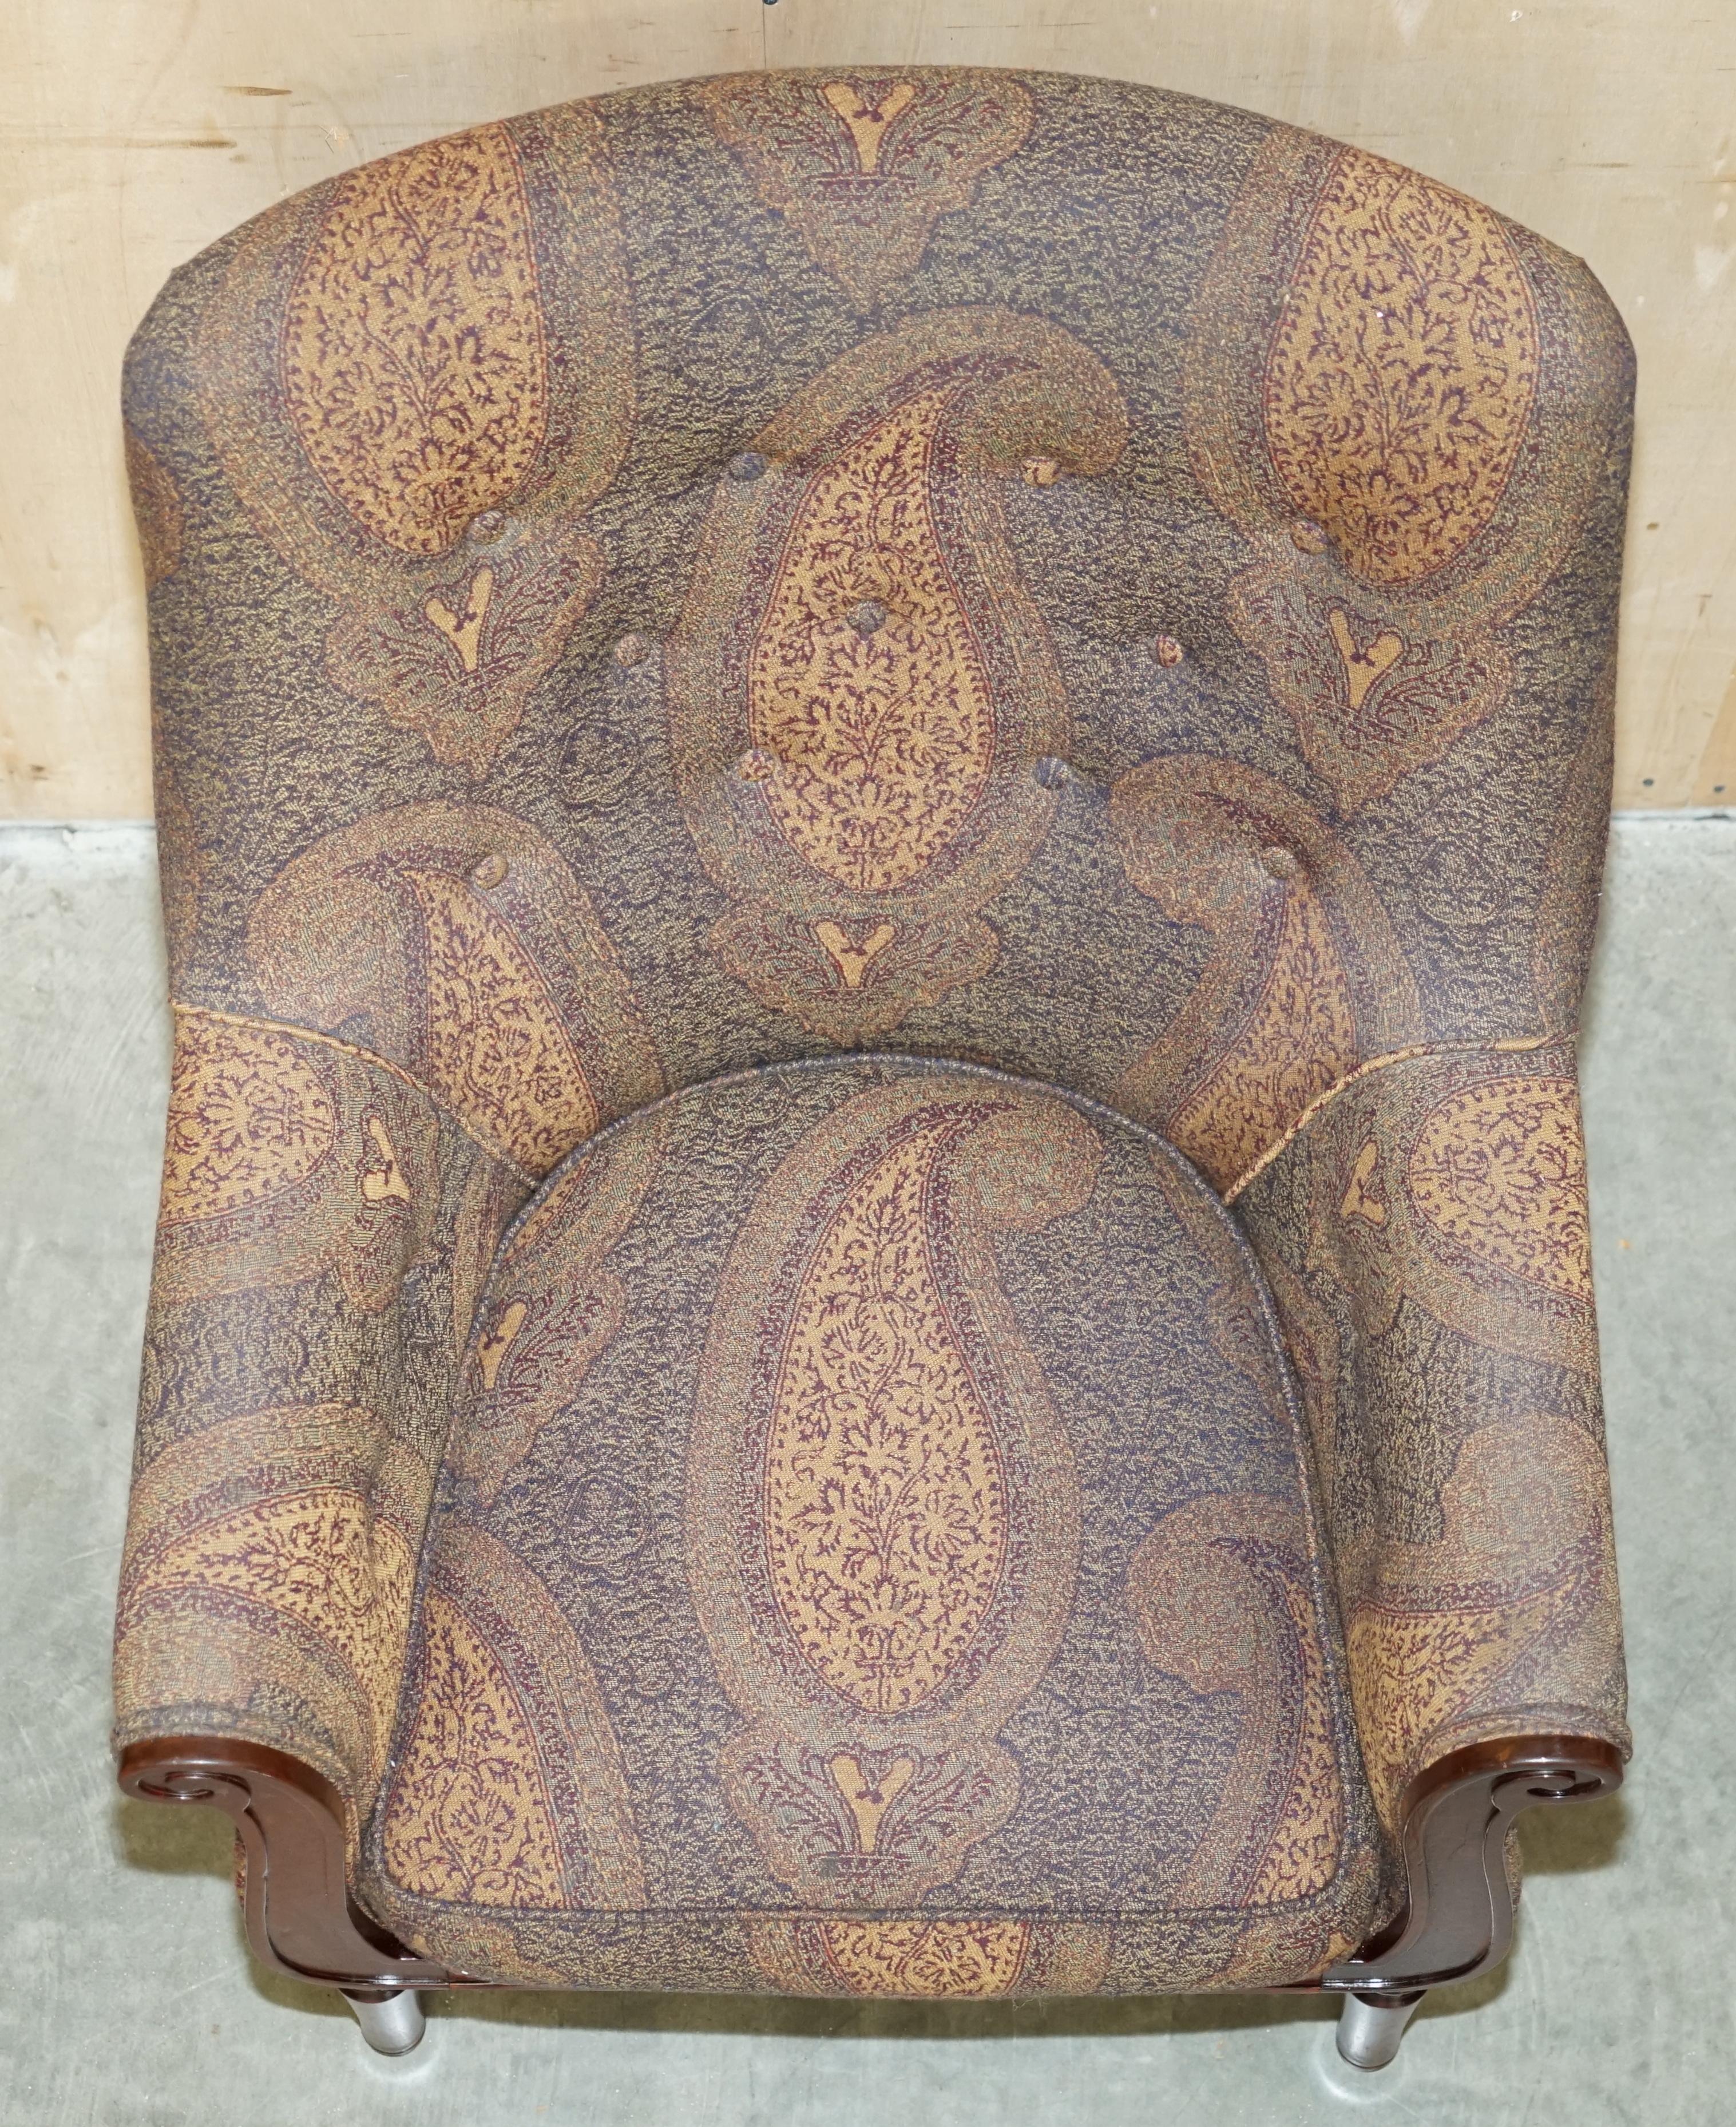 PAiR OF GEORGE SMITH WILLIAM IV LIBRARY ARMCHAIRS UNIQUE UPHOLSTERY For Sale 5